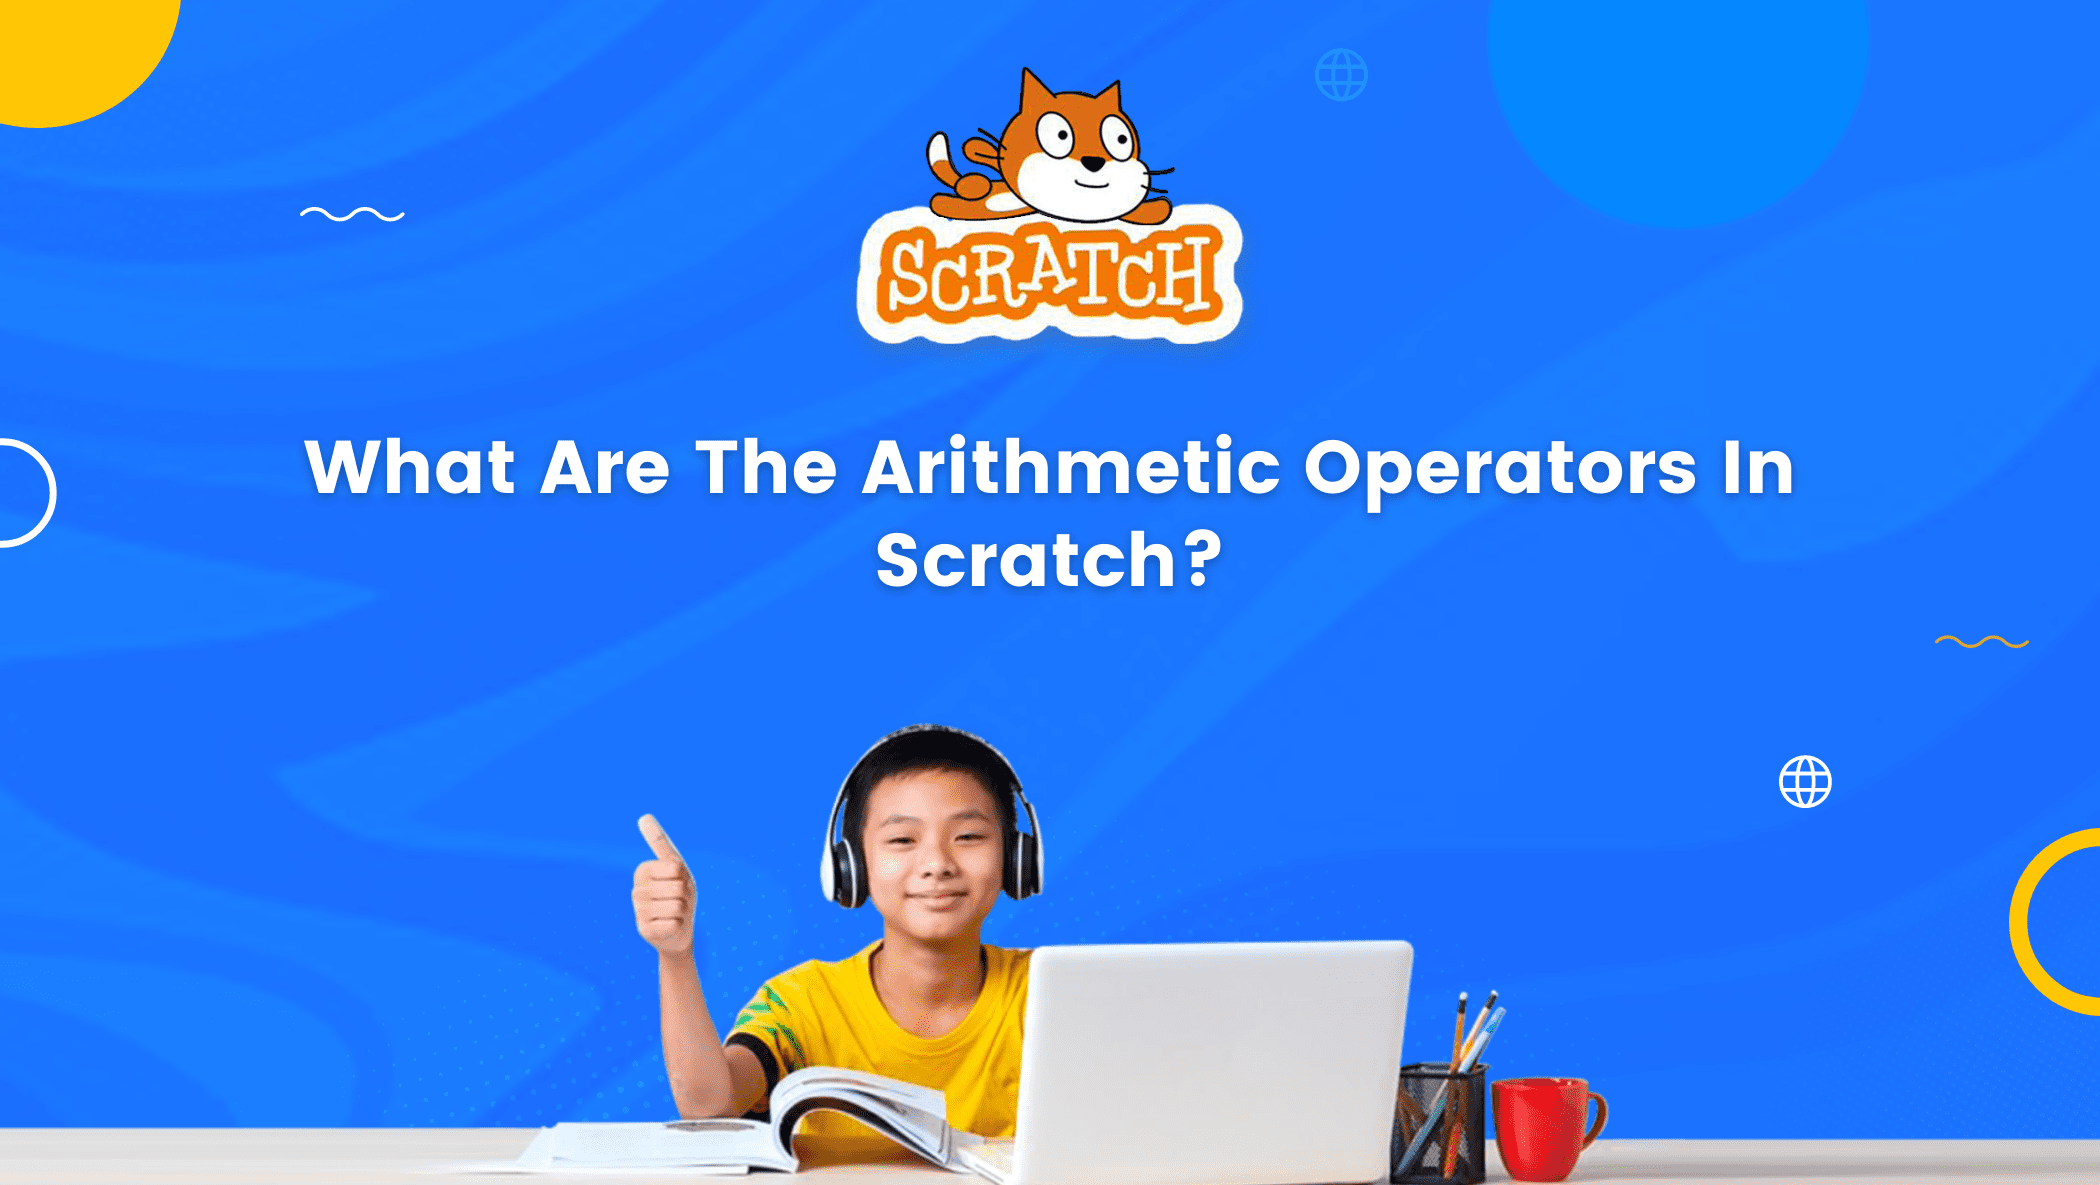 https://brightchamps.com/blog/wp-content/uploads/2022/03/What-Are-The-Arithmetic-Operators-In-Scratch.png